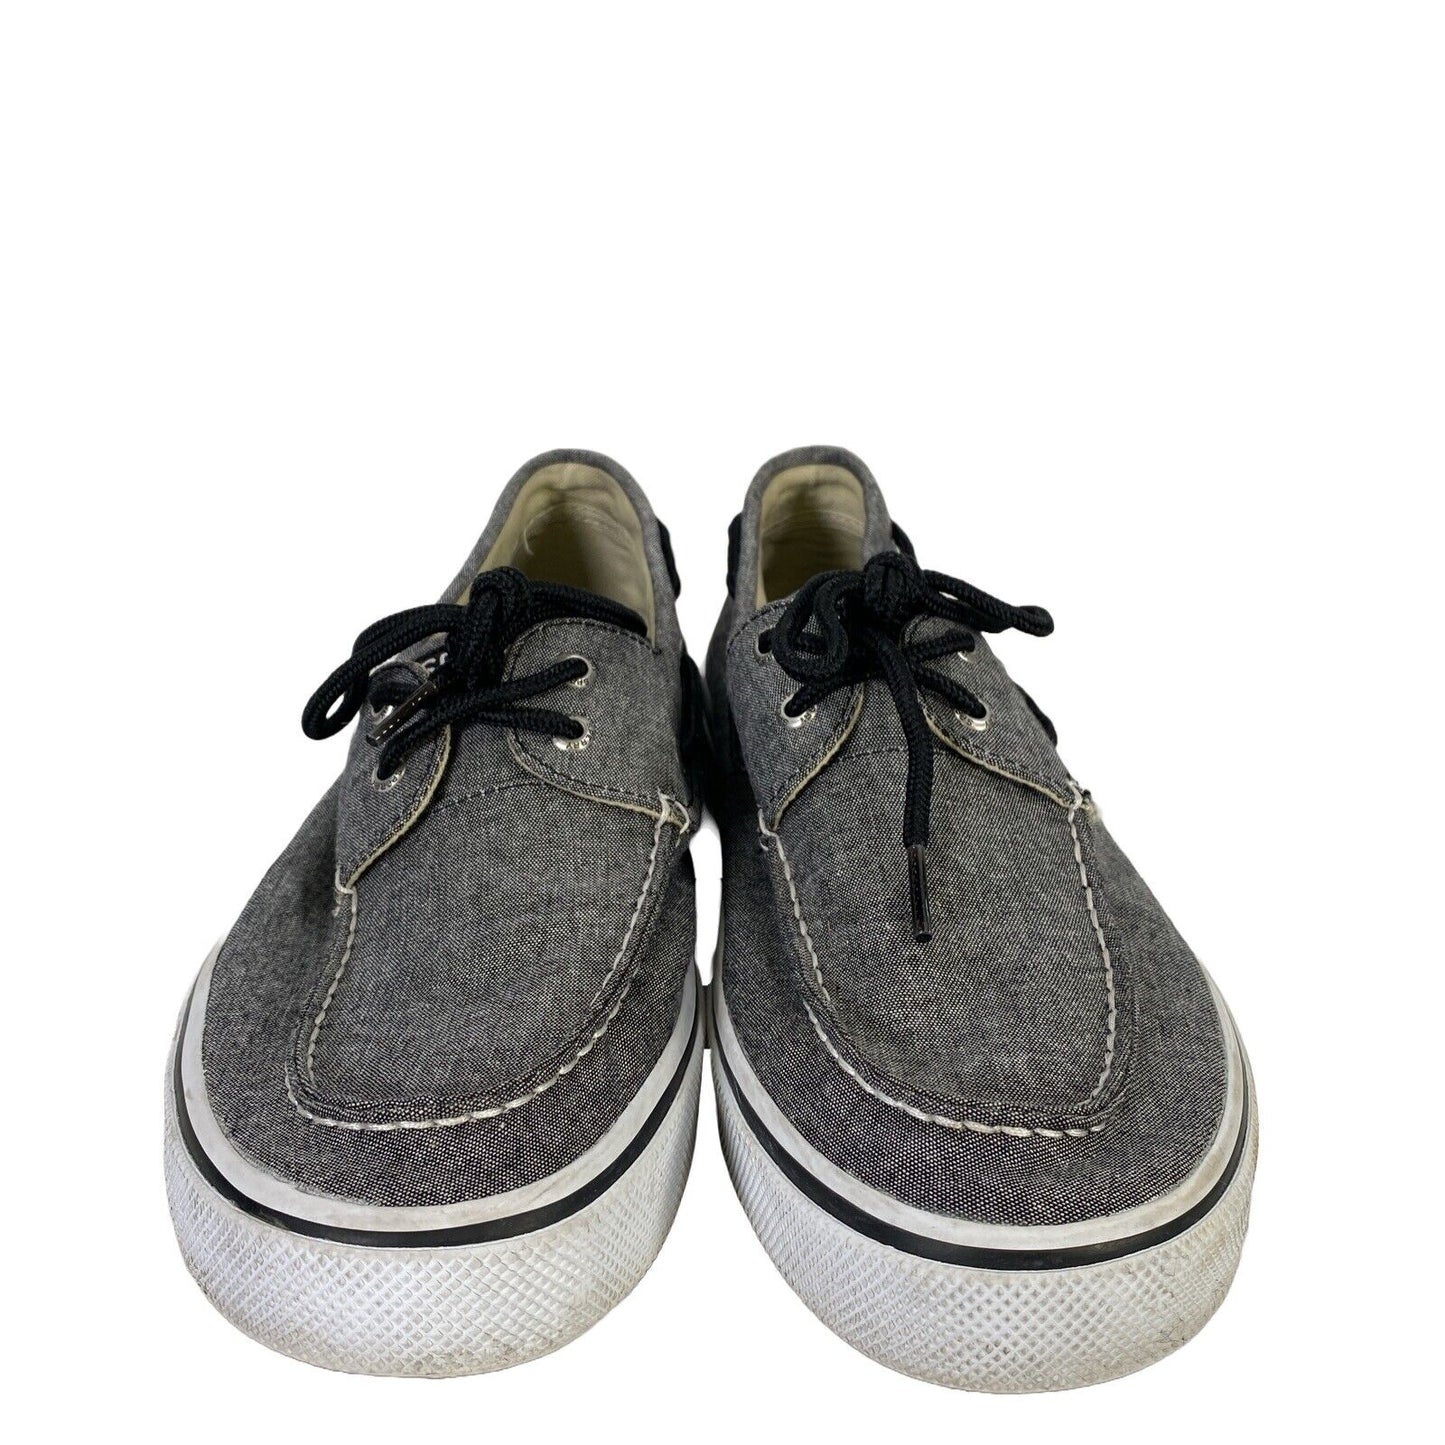 Sperry Men's Gray/Black Canvas Boat Shoes - 11